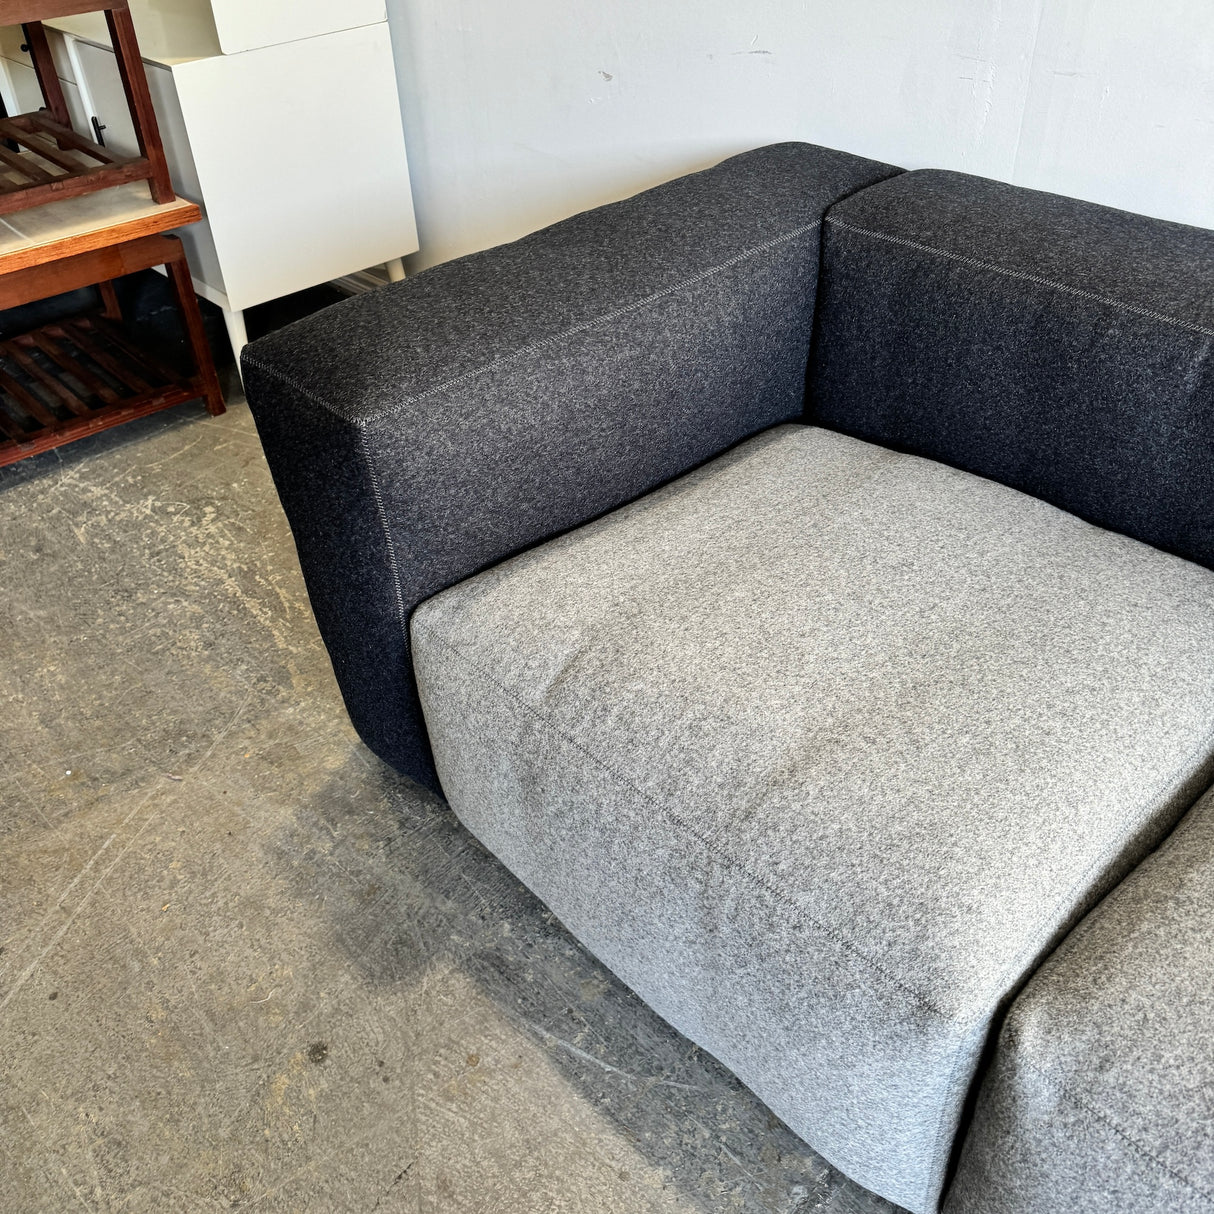 New! Hay Mags Soft LOW 2.5-SEAT SOFA with ottoman